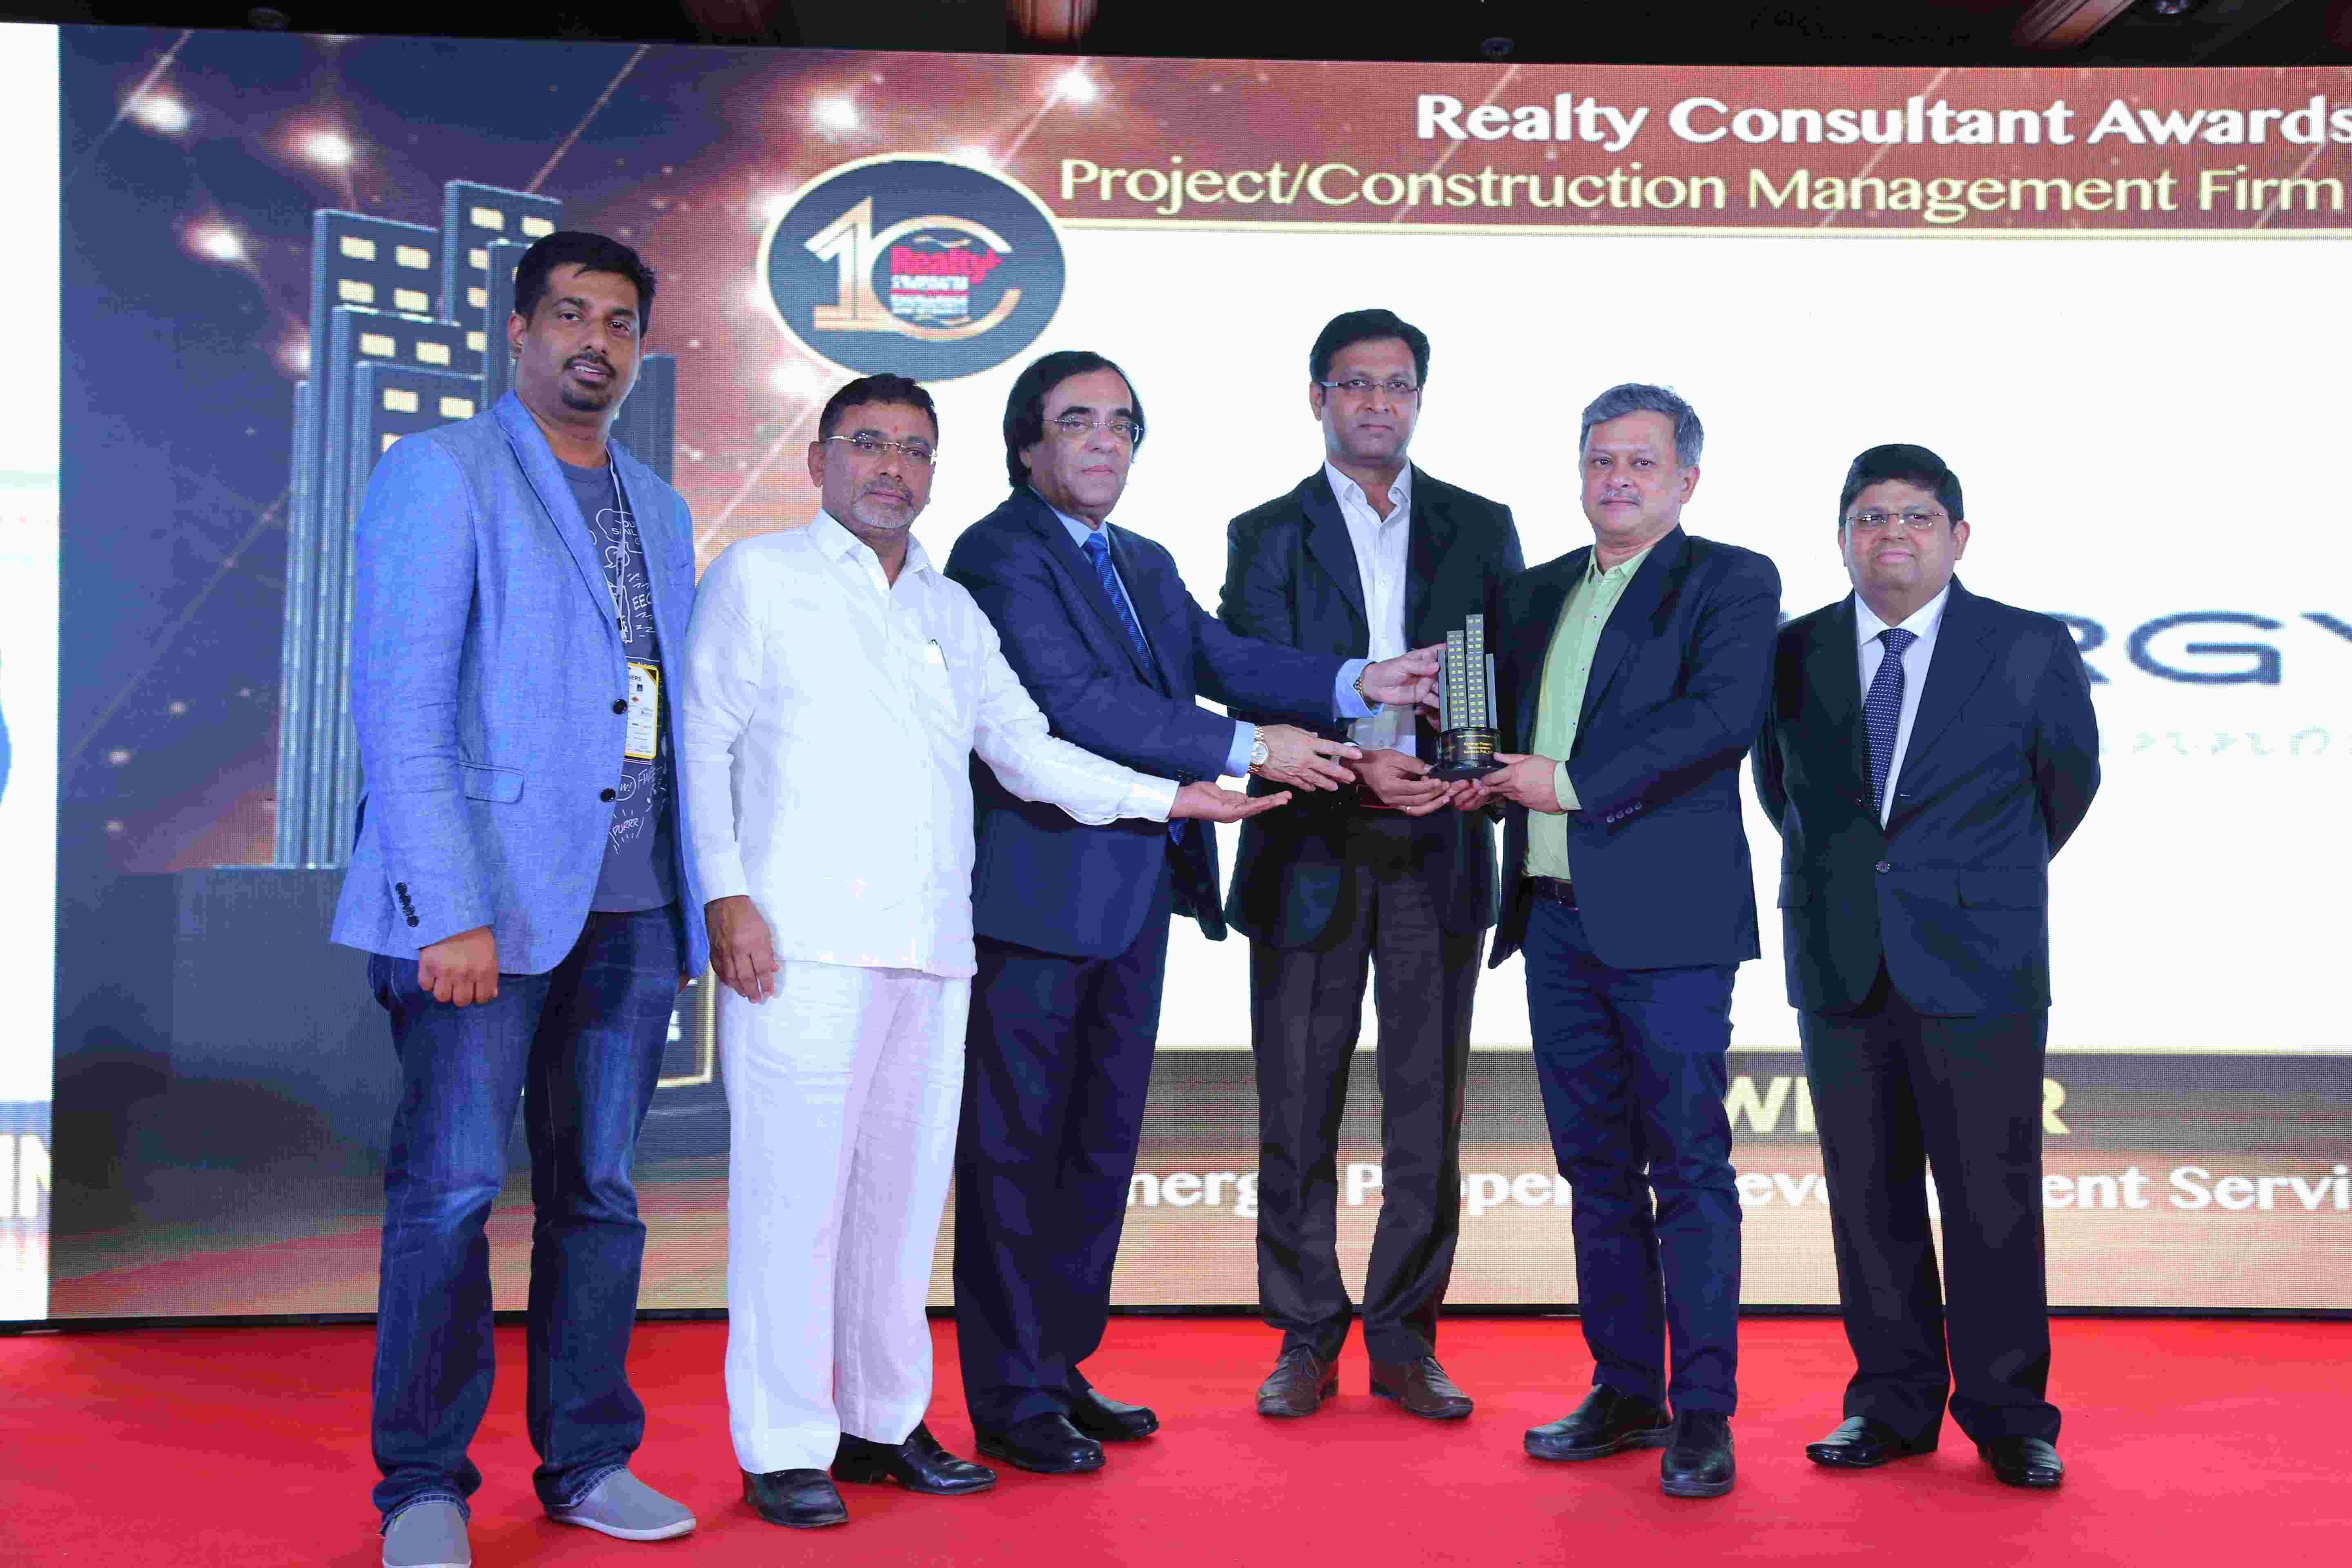 Synergy Property Development Services recognized as 'Project Management Firm of the Year 2018'